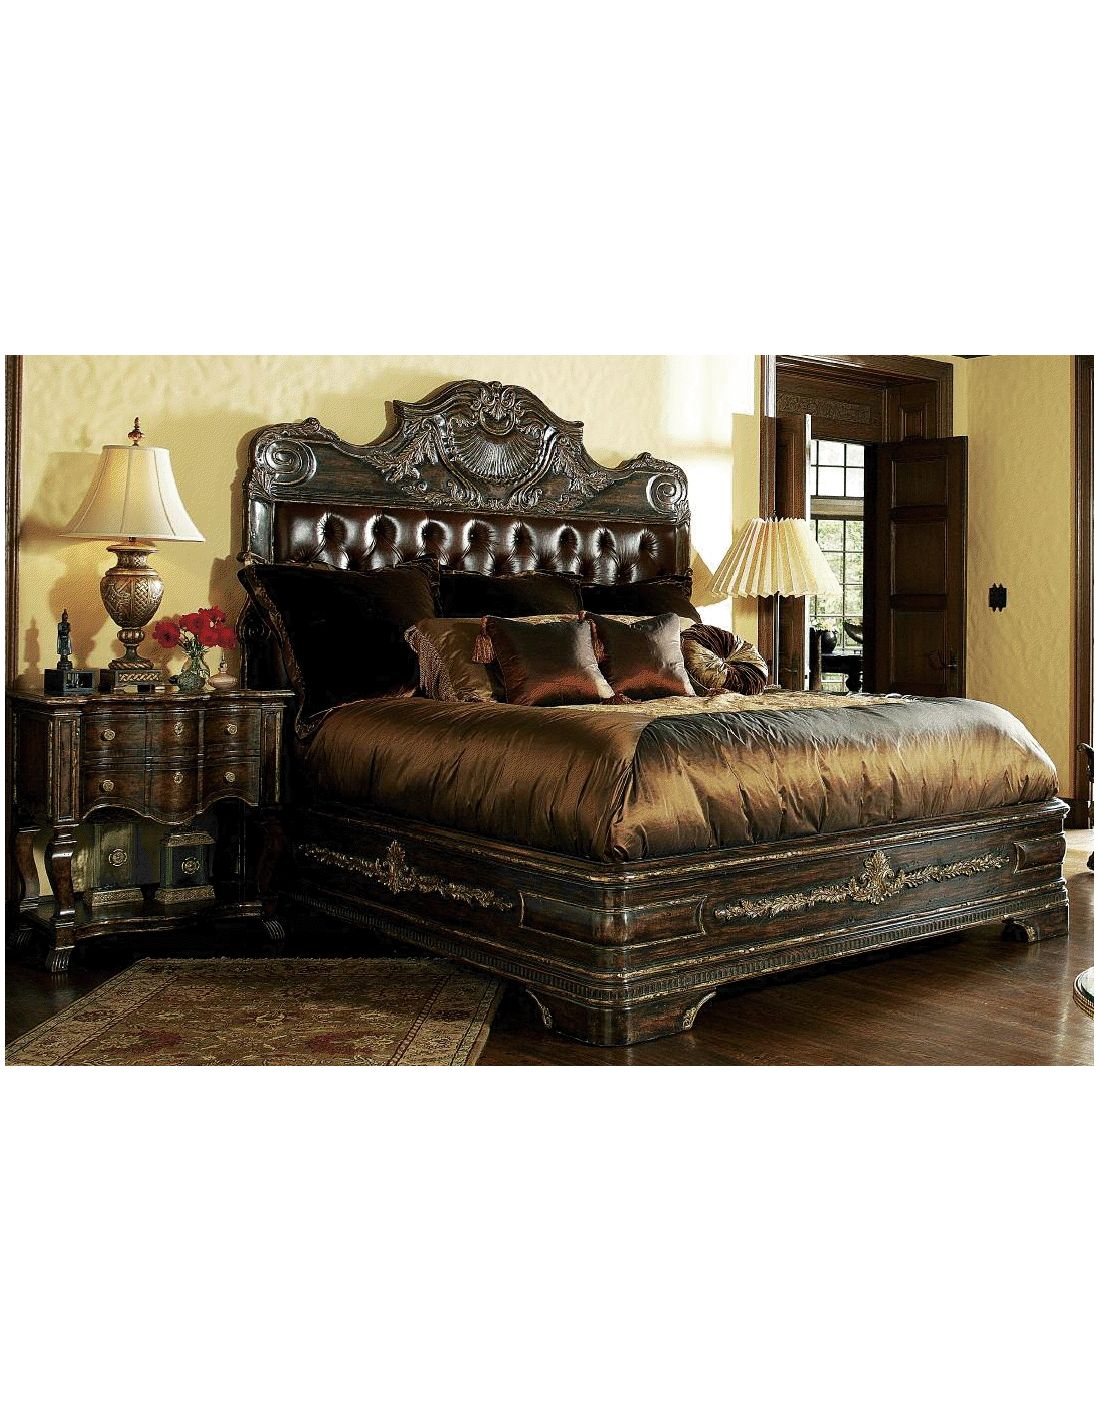 1 High End Master Bedroom Set Carvings, Bedroom Set With Leather Headboard